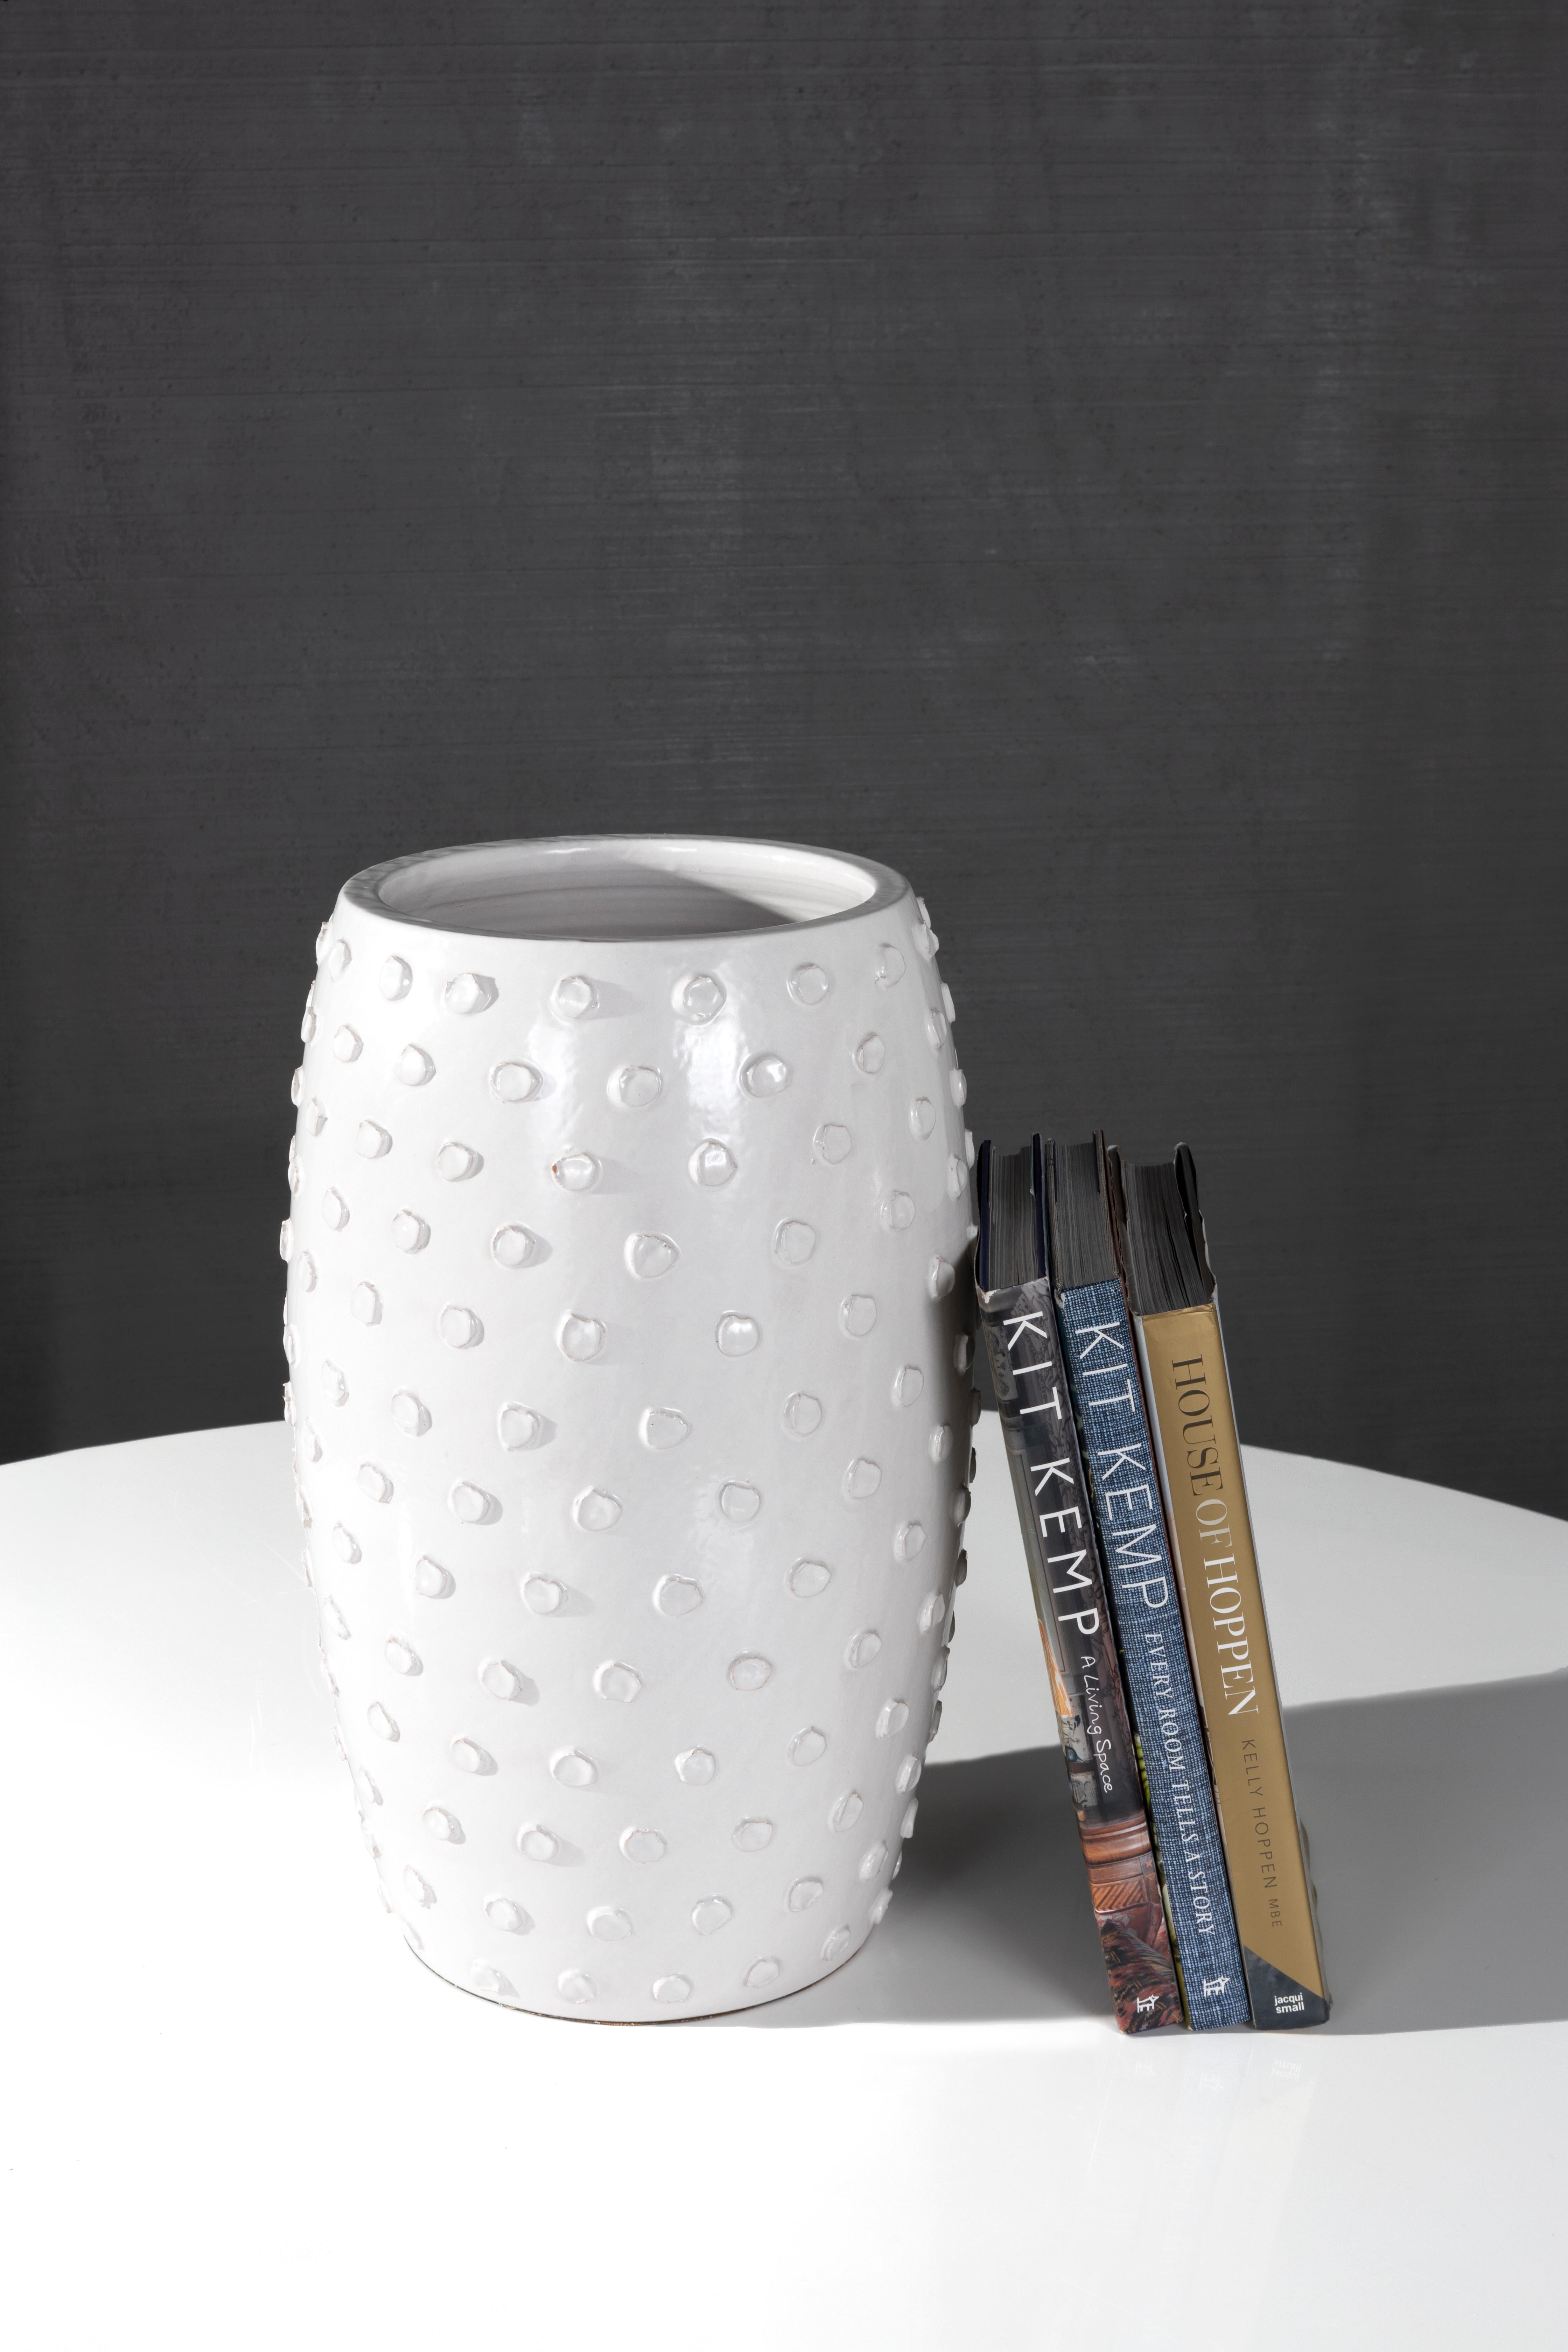 The Boru Vase, the newest addition to the RENG line, off-white glazed terracotta vase with dot pattern based off the table lamp which shares its name sake.

All pieces from the RENG line are designed in Dallas, Texas by Brendan Bass. Then a small